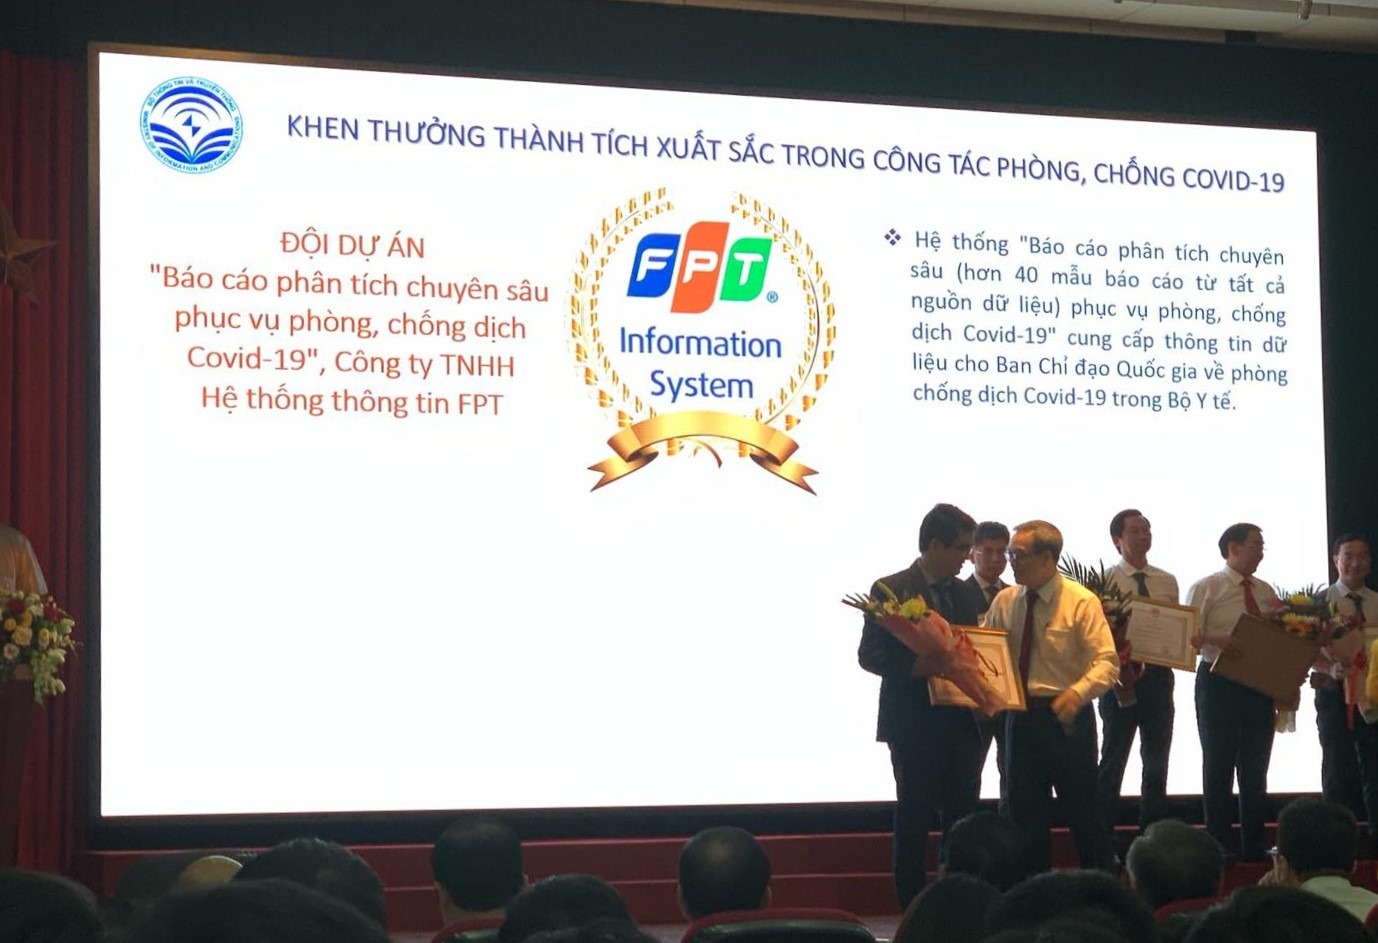 Certificate of Merit from Vietnam’s Minister of Information and Communications for the development of profound analysis reports for COVID-19 epidemic prevention and control